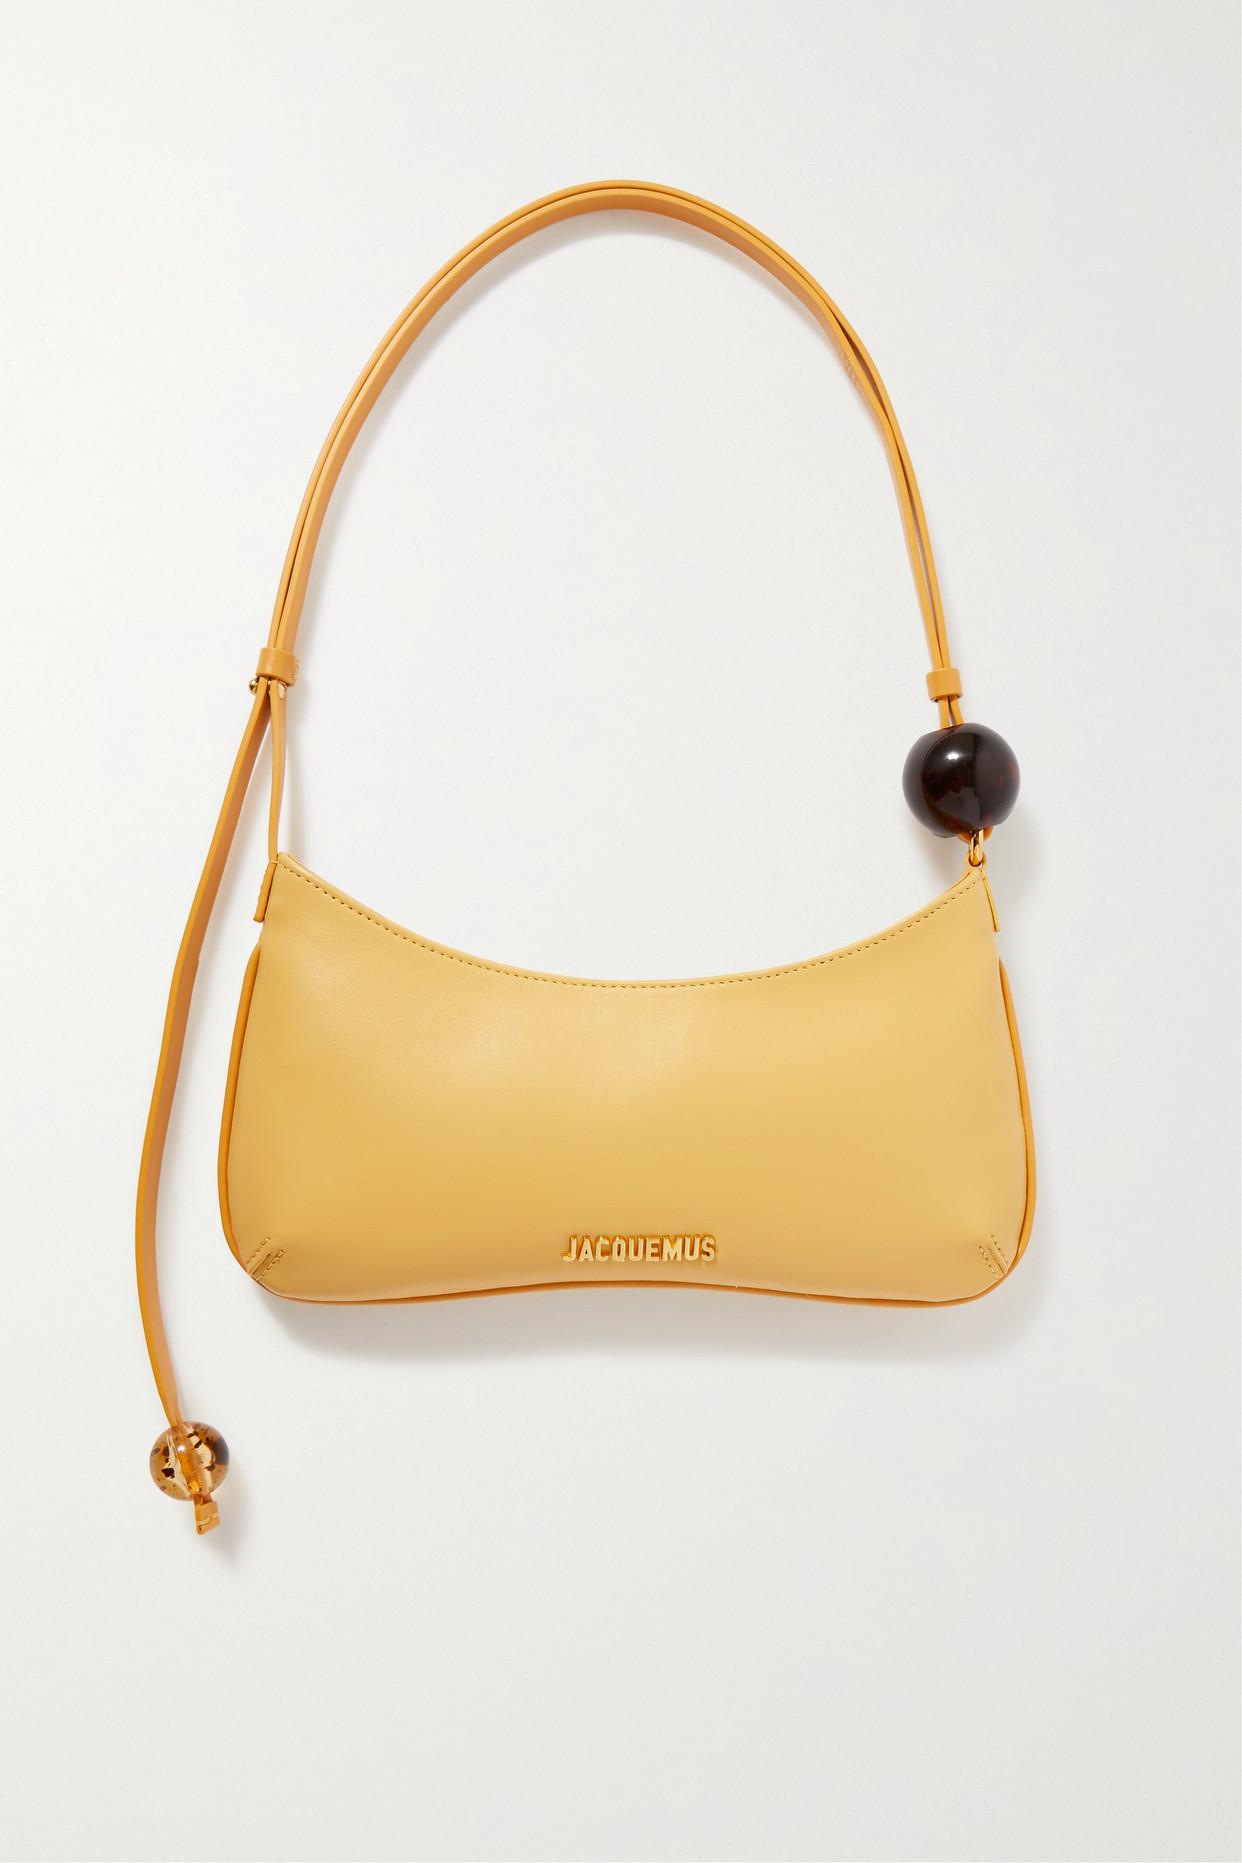 Jacquemus Le Bisou Perle Embellished Leather Shoulder Bag in Yellow | Lyst